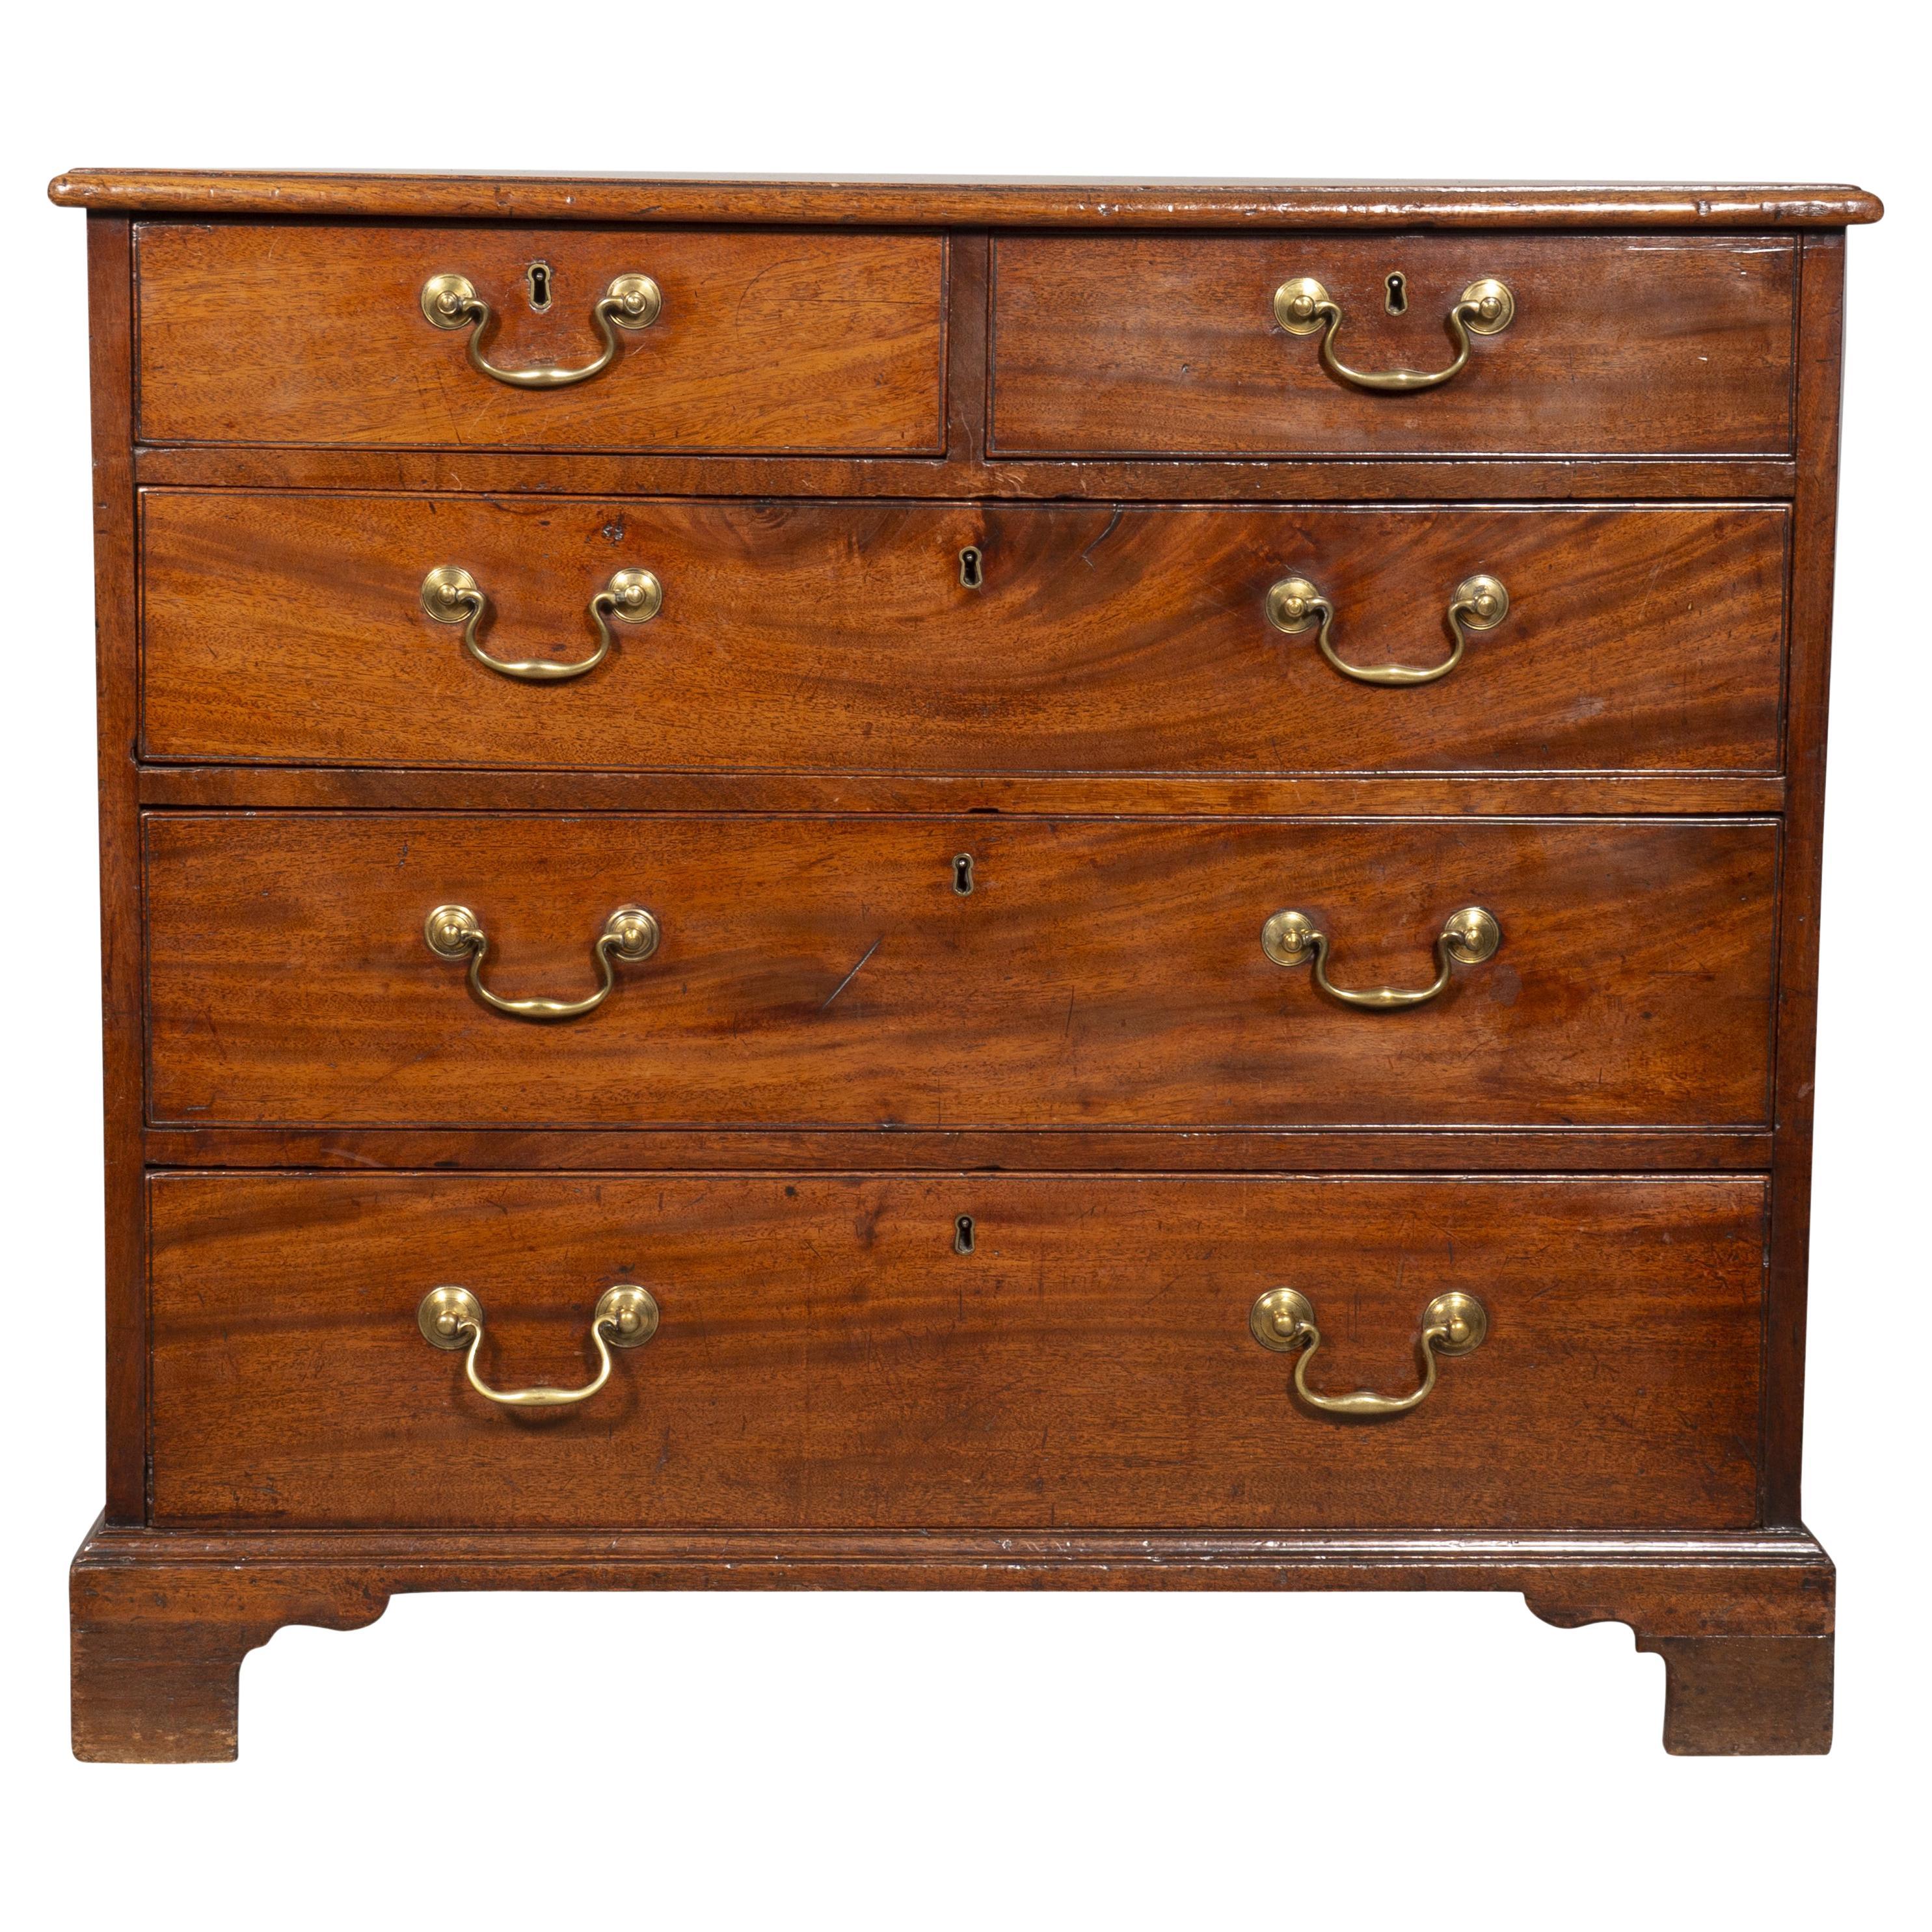 Made of fine quality of timber with rich brown color. Rectangular top with molded edge over two small and three long drawers with original brass bail handles, bracket feet. From the estate of Douglas S. Cramer, a famous television producer.